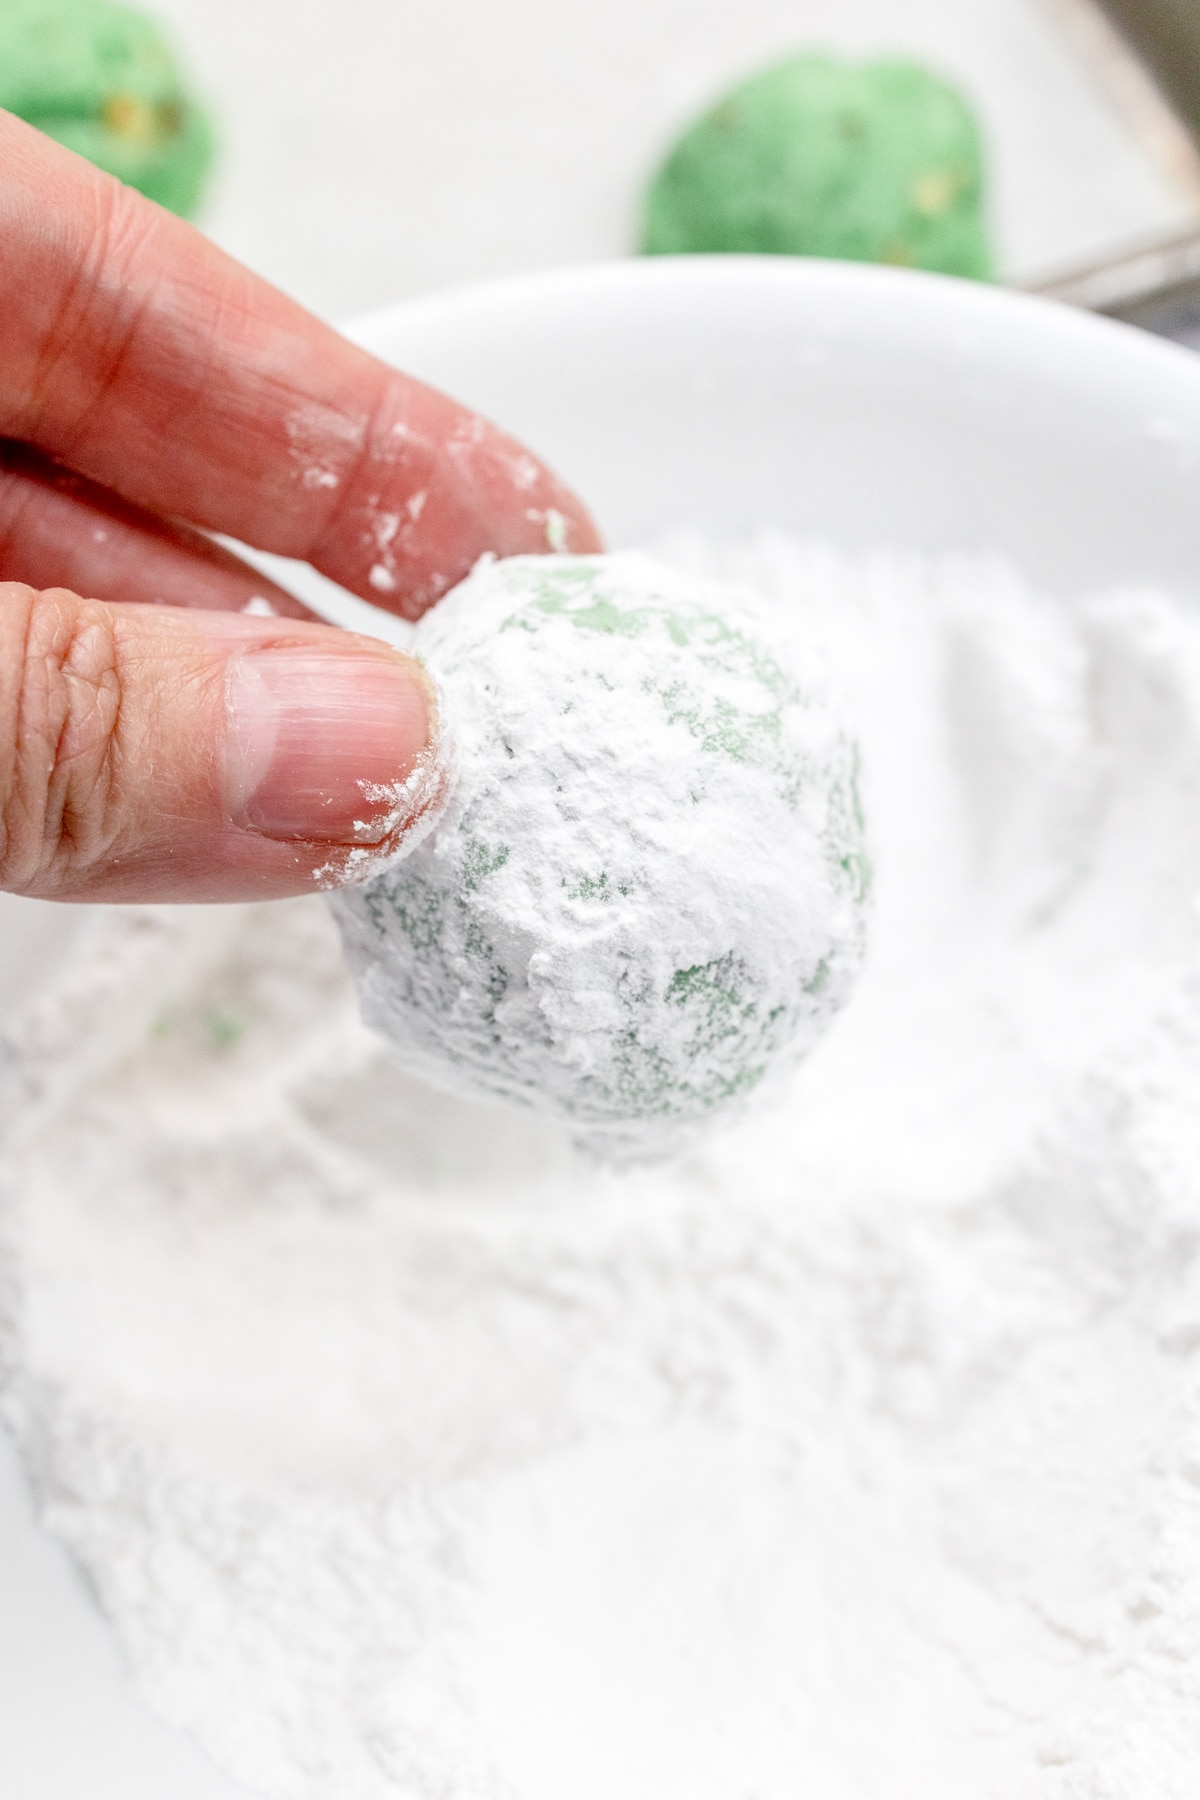 Close up view of a hand rolling a cookie in a bowl of powdered sugar.